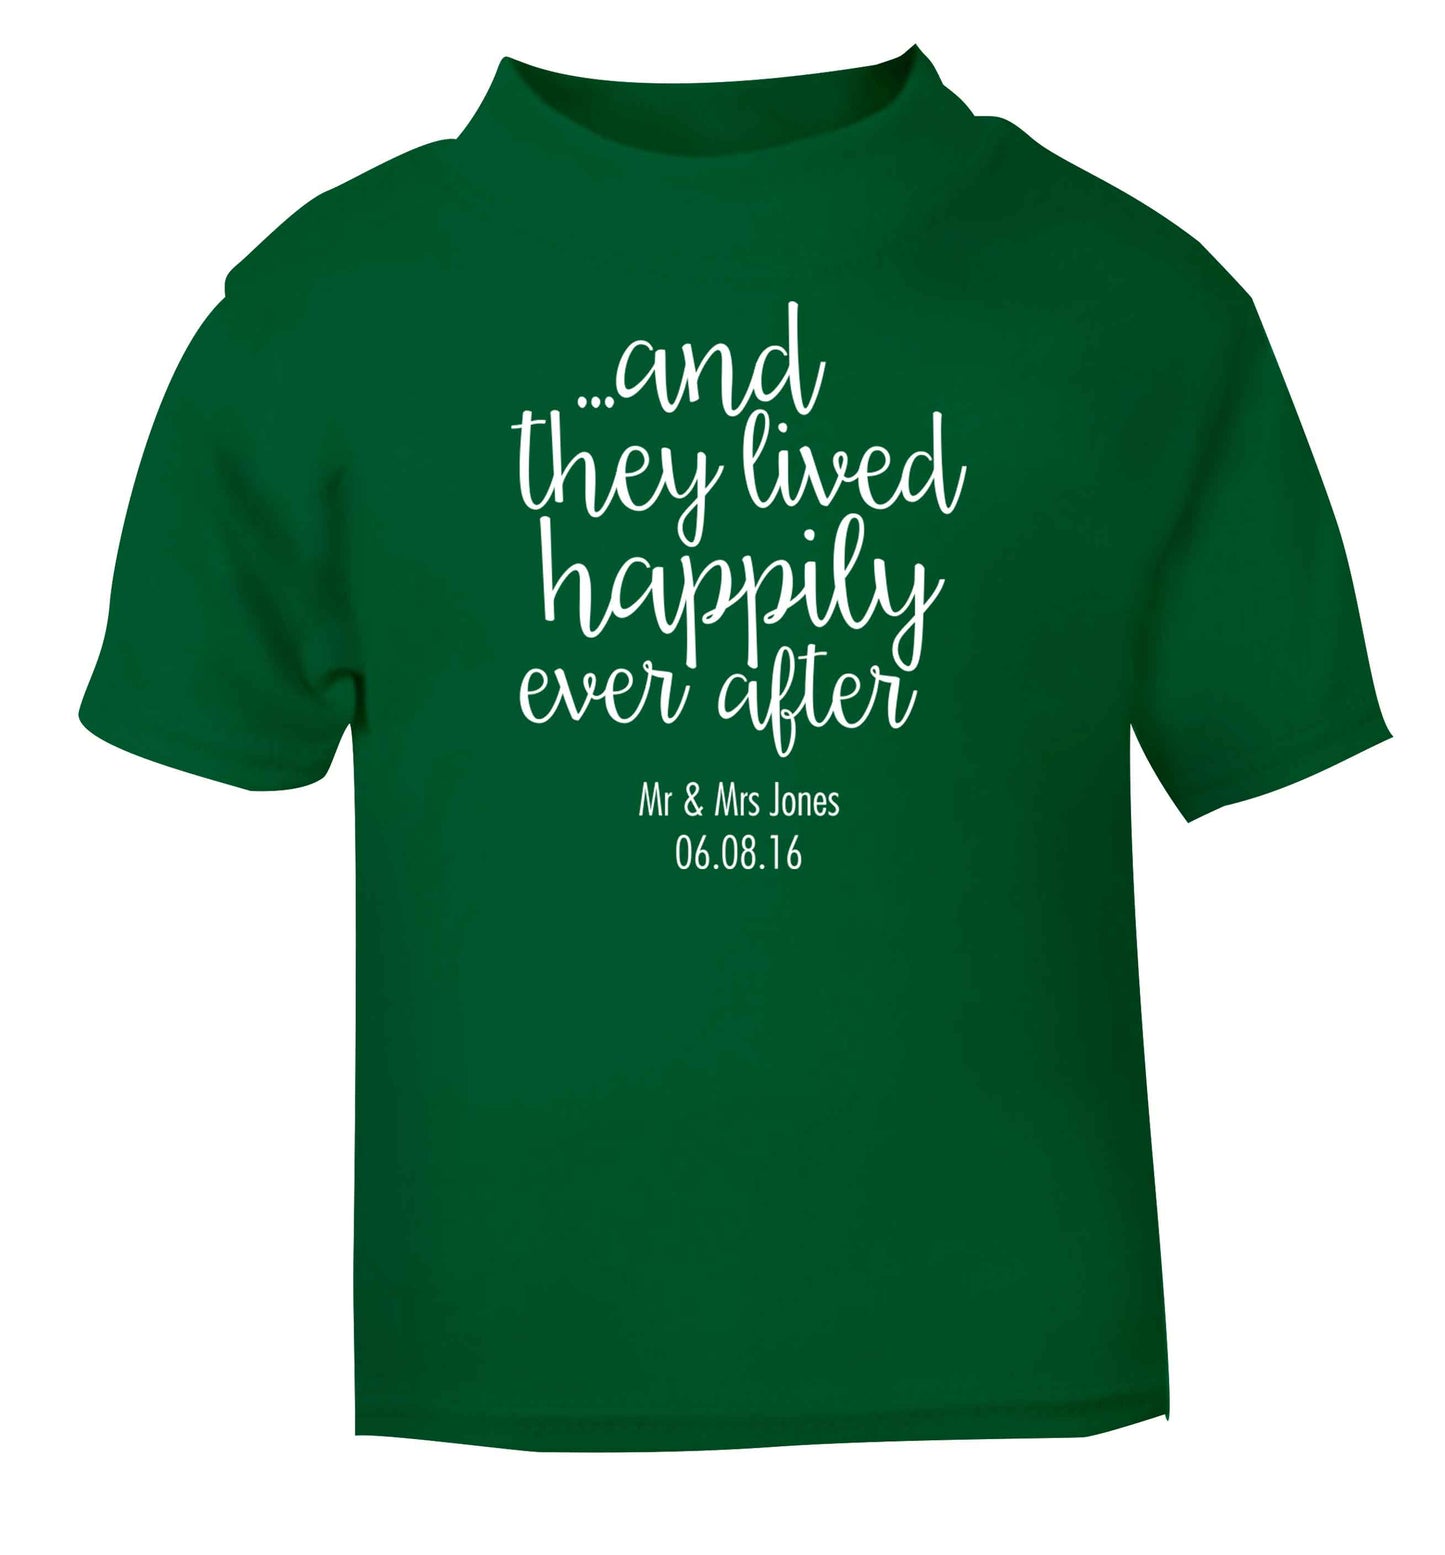 ...and they lived happily ever after - personalised date and names green baby toddler Tshirt 2 Years